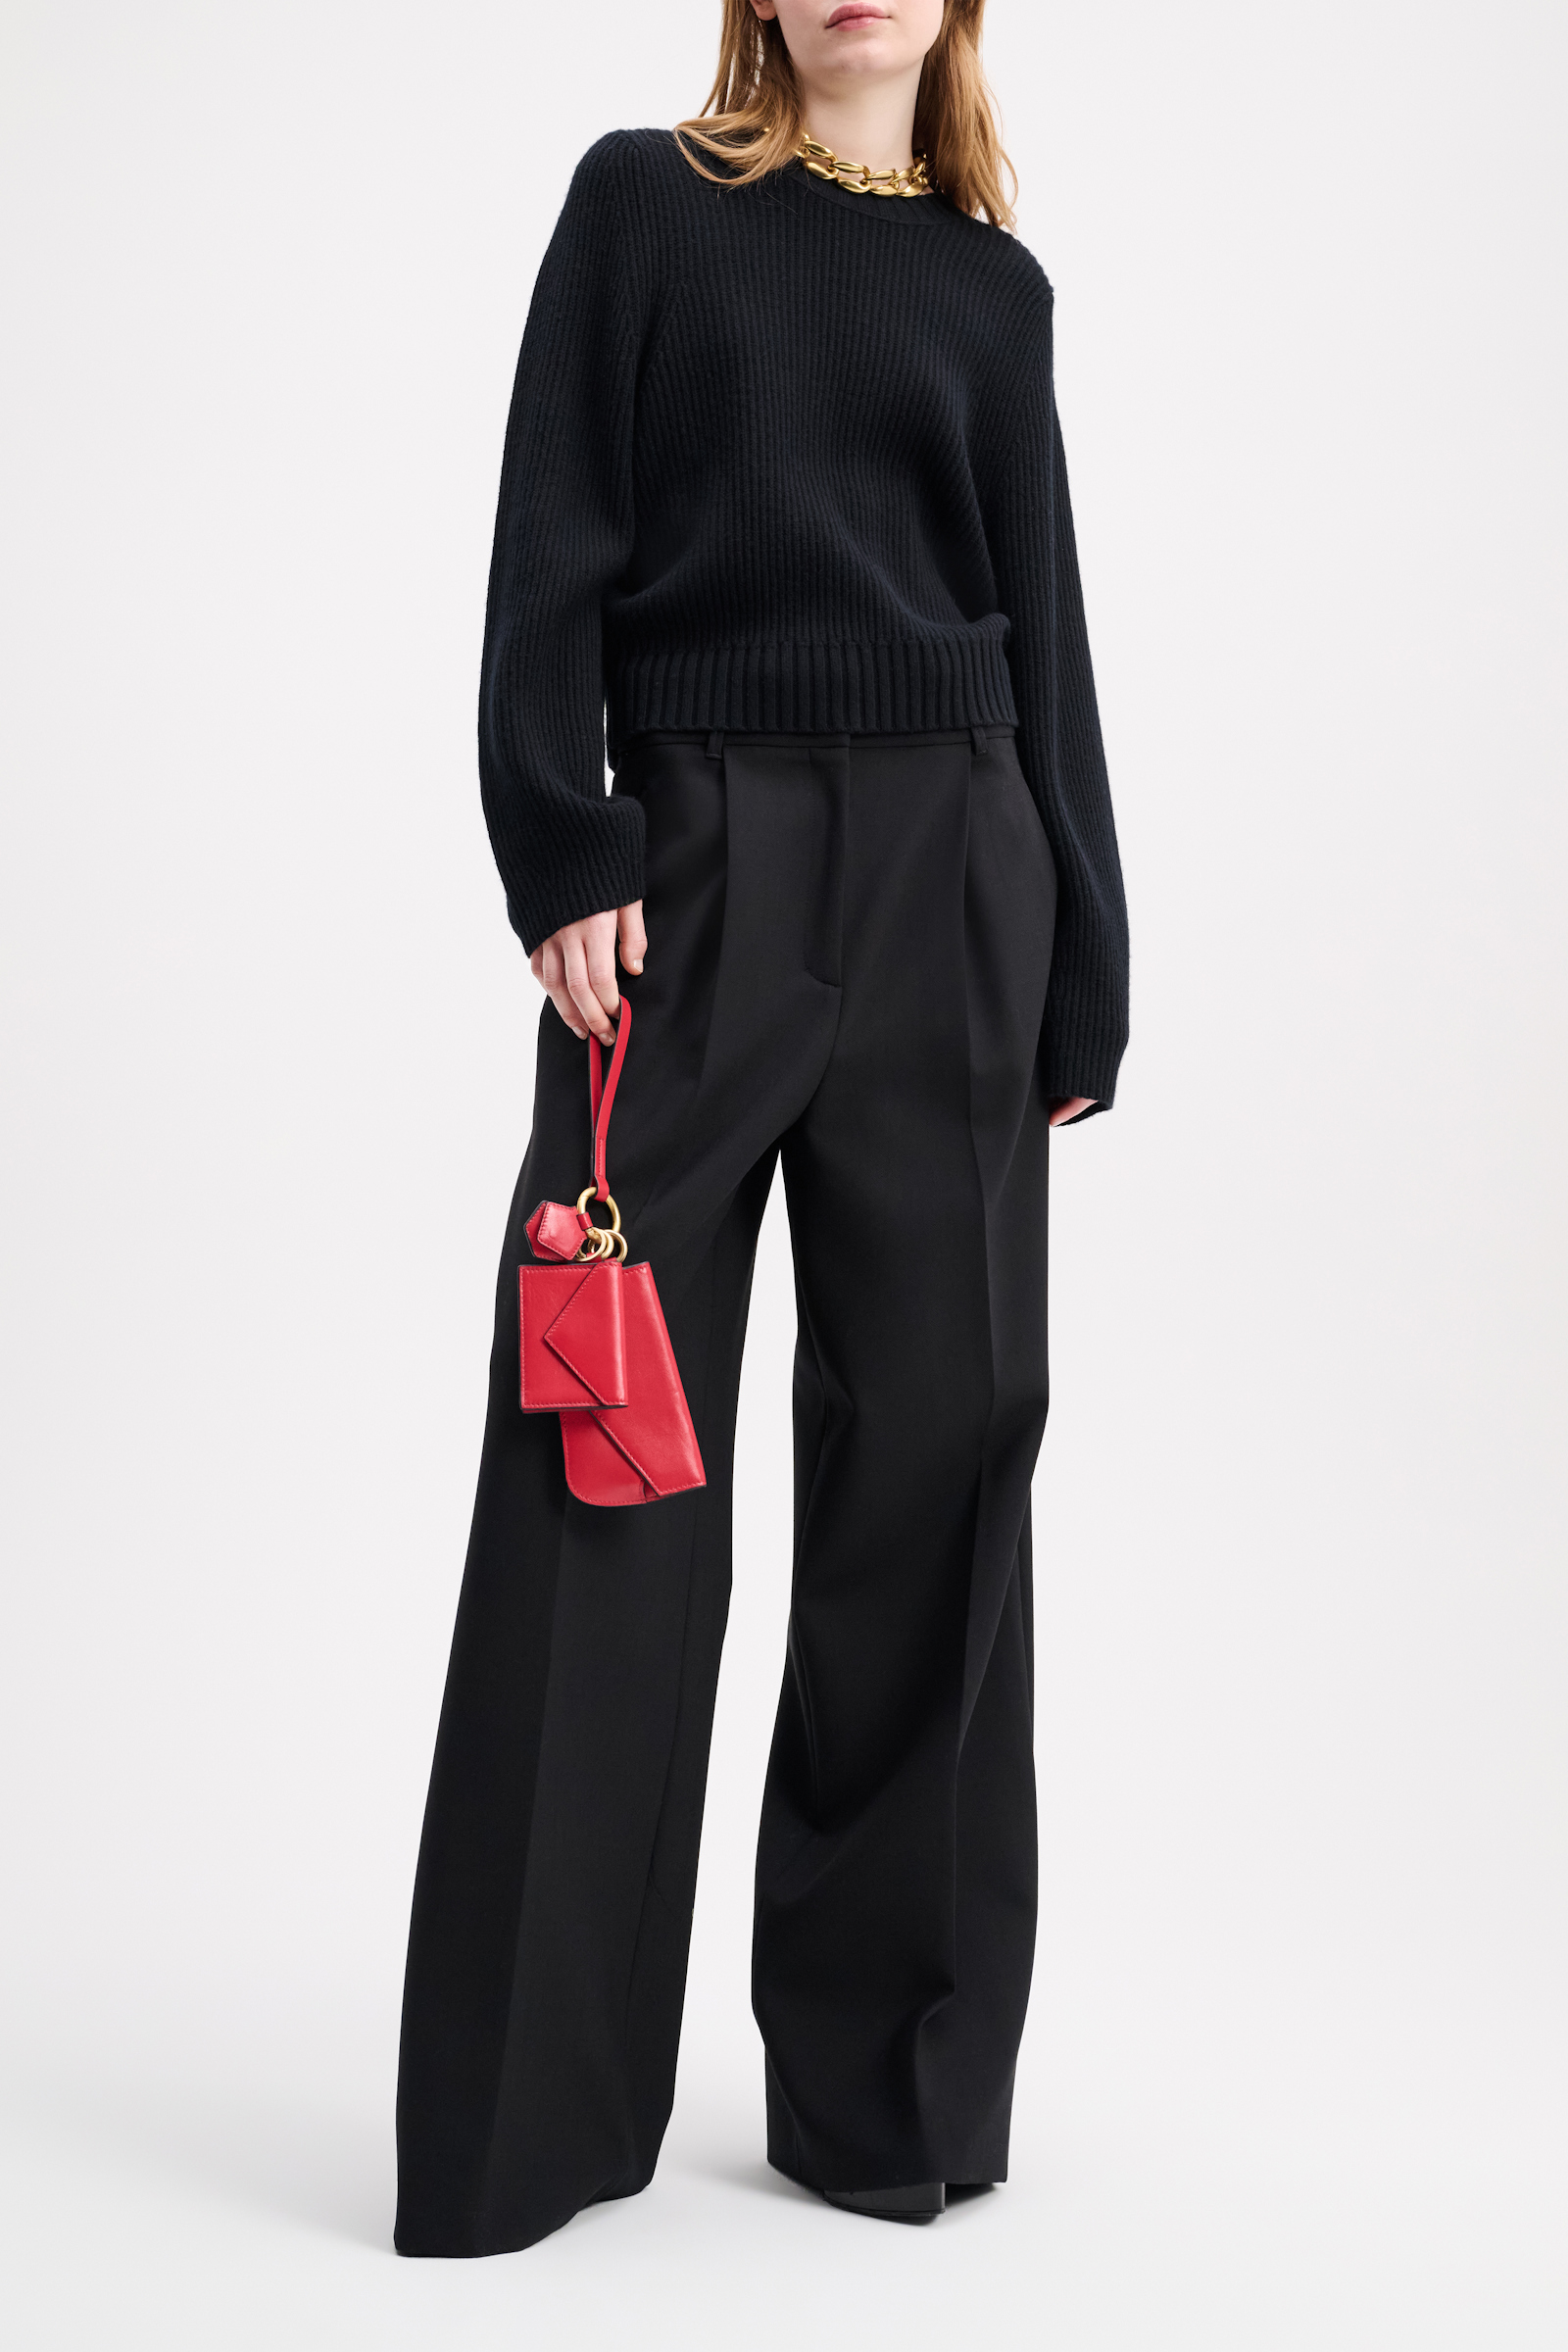 Dorothee Schumacher RIBBED PULLOVER IN MERINO AND CASHMERE pure black